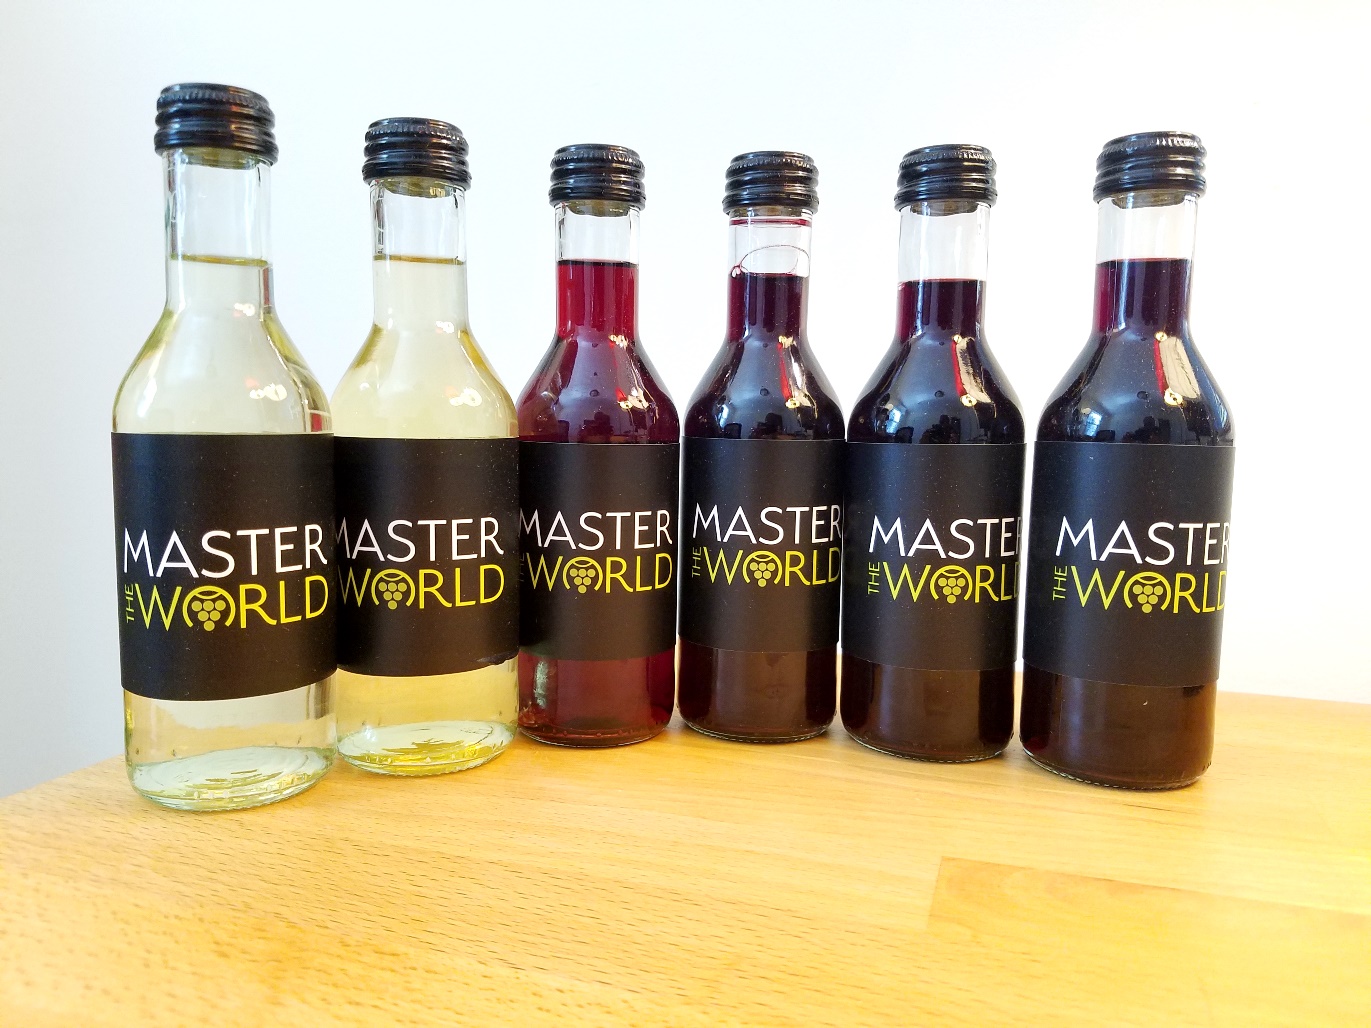 Blind Tasting Wines from Chile with a Master The World Wine Kit Sampler, Wine Casual